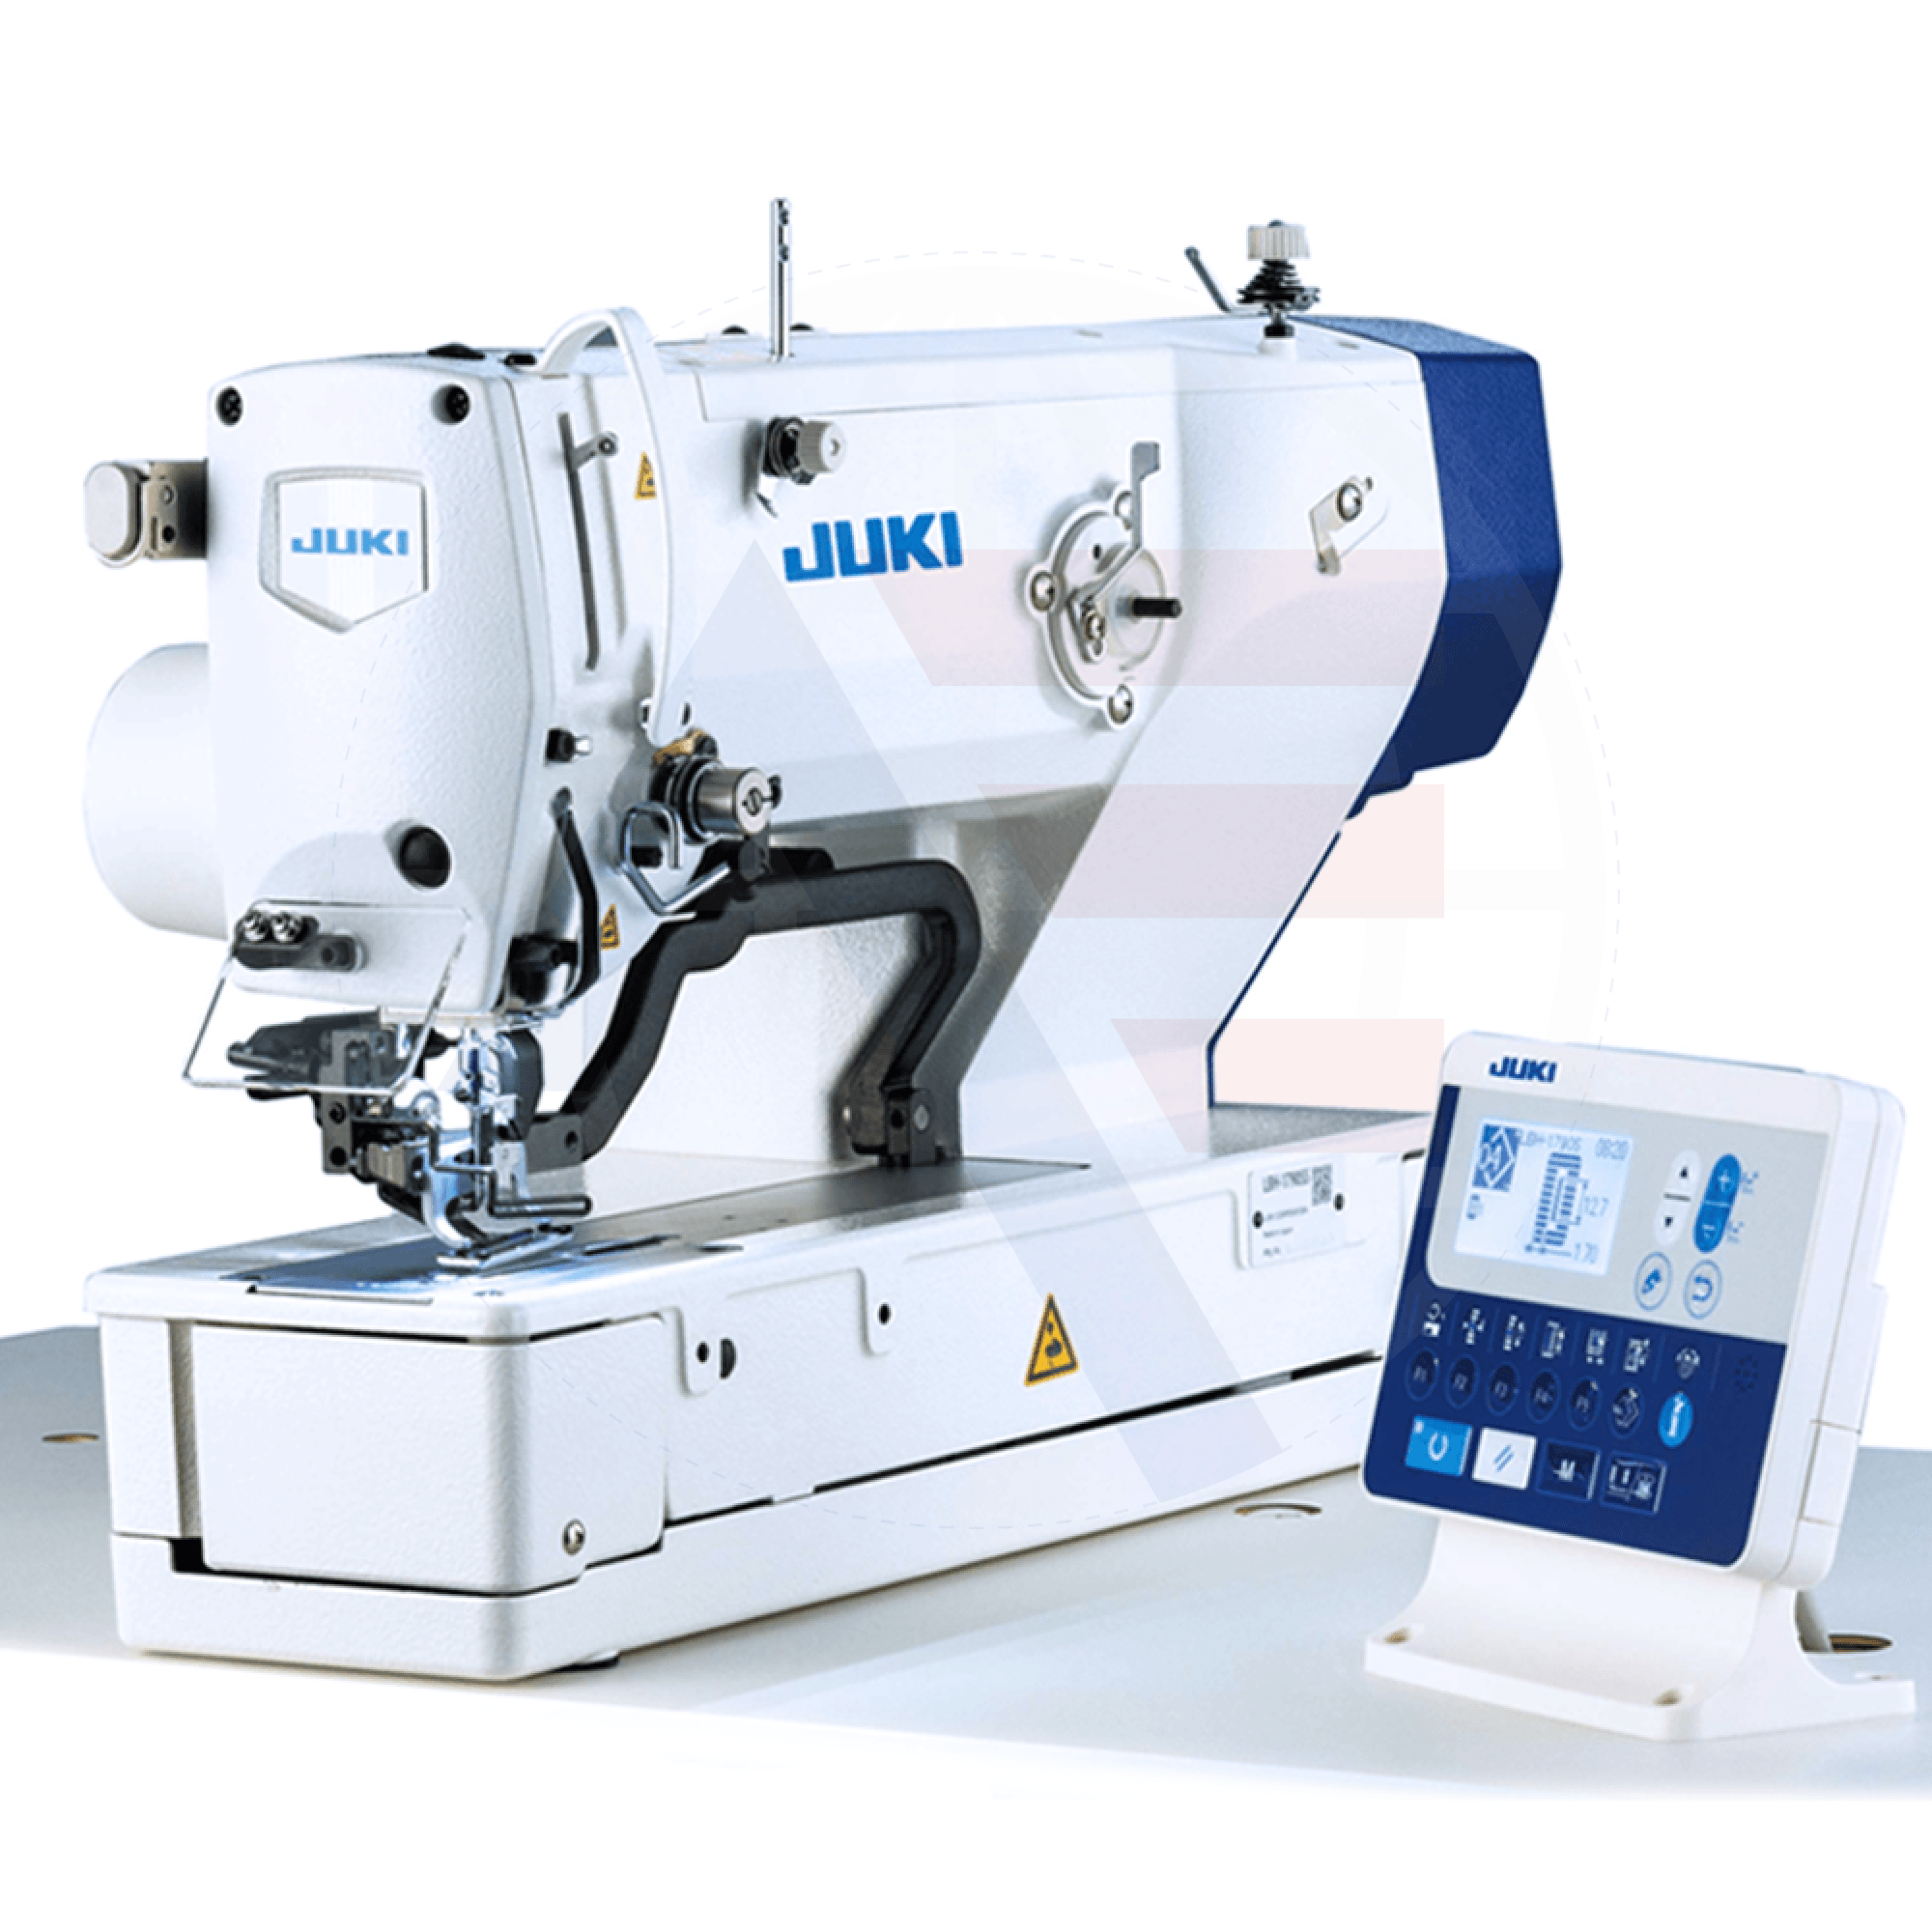 Juki Simply Smart Series Solution Lbh-1790S Computer-Controlled High-Speed Buttonhole Machine Sewing